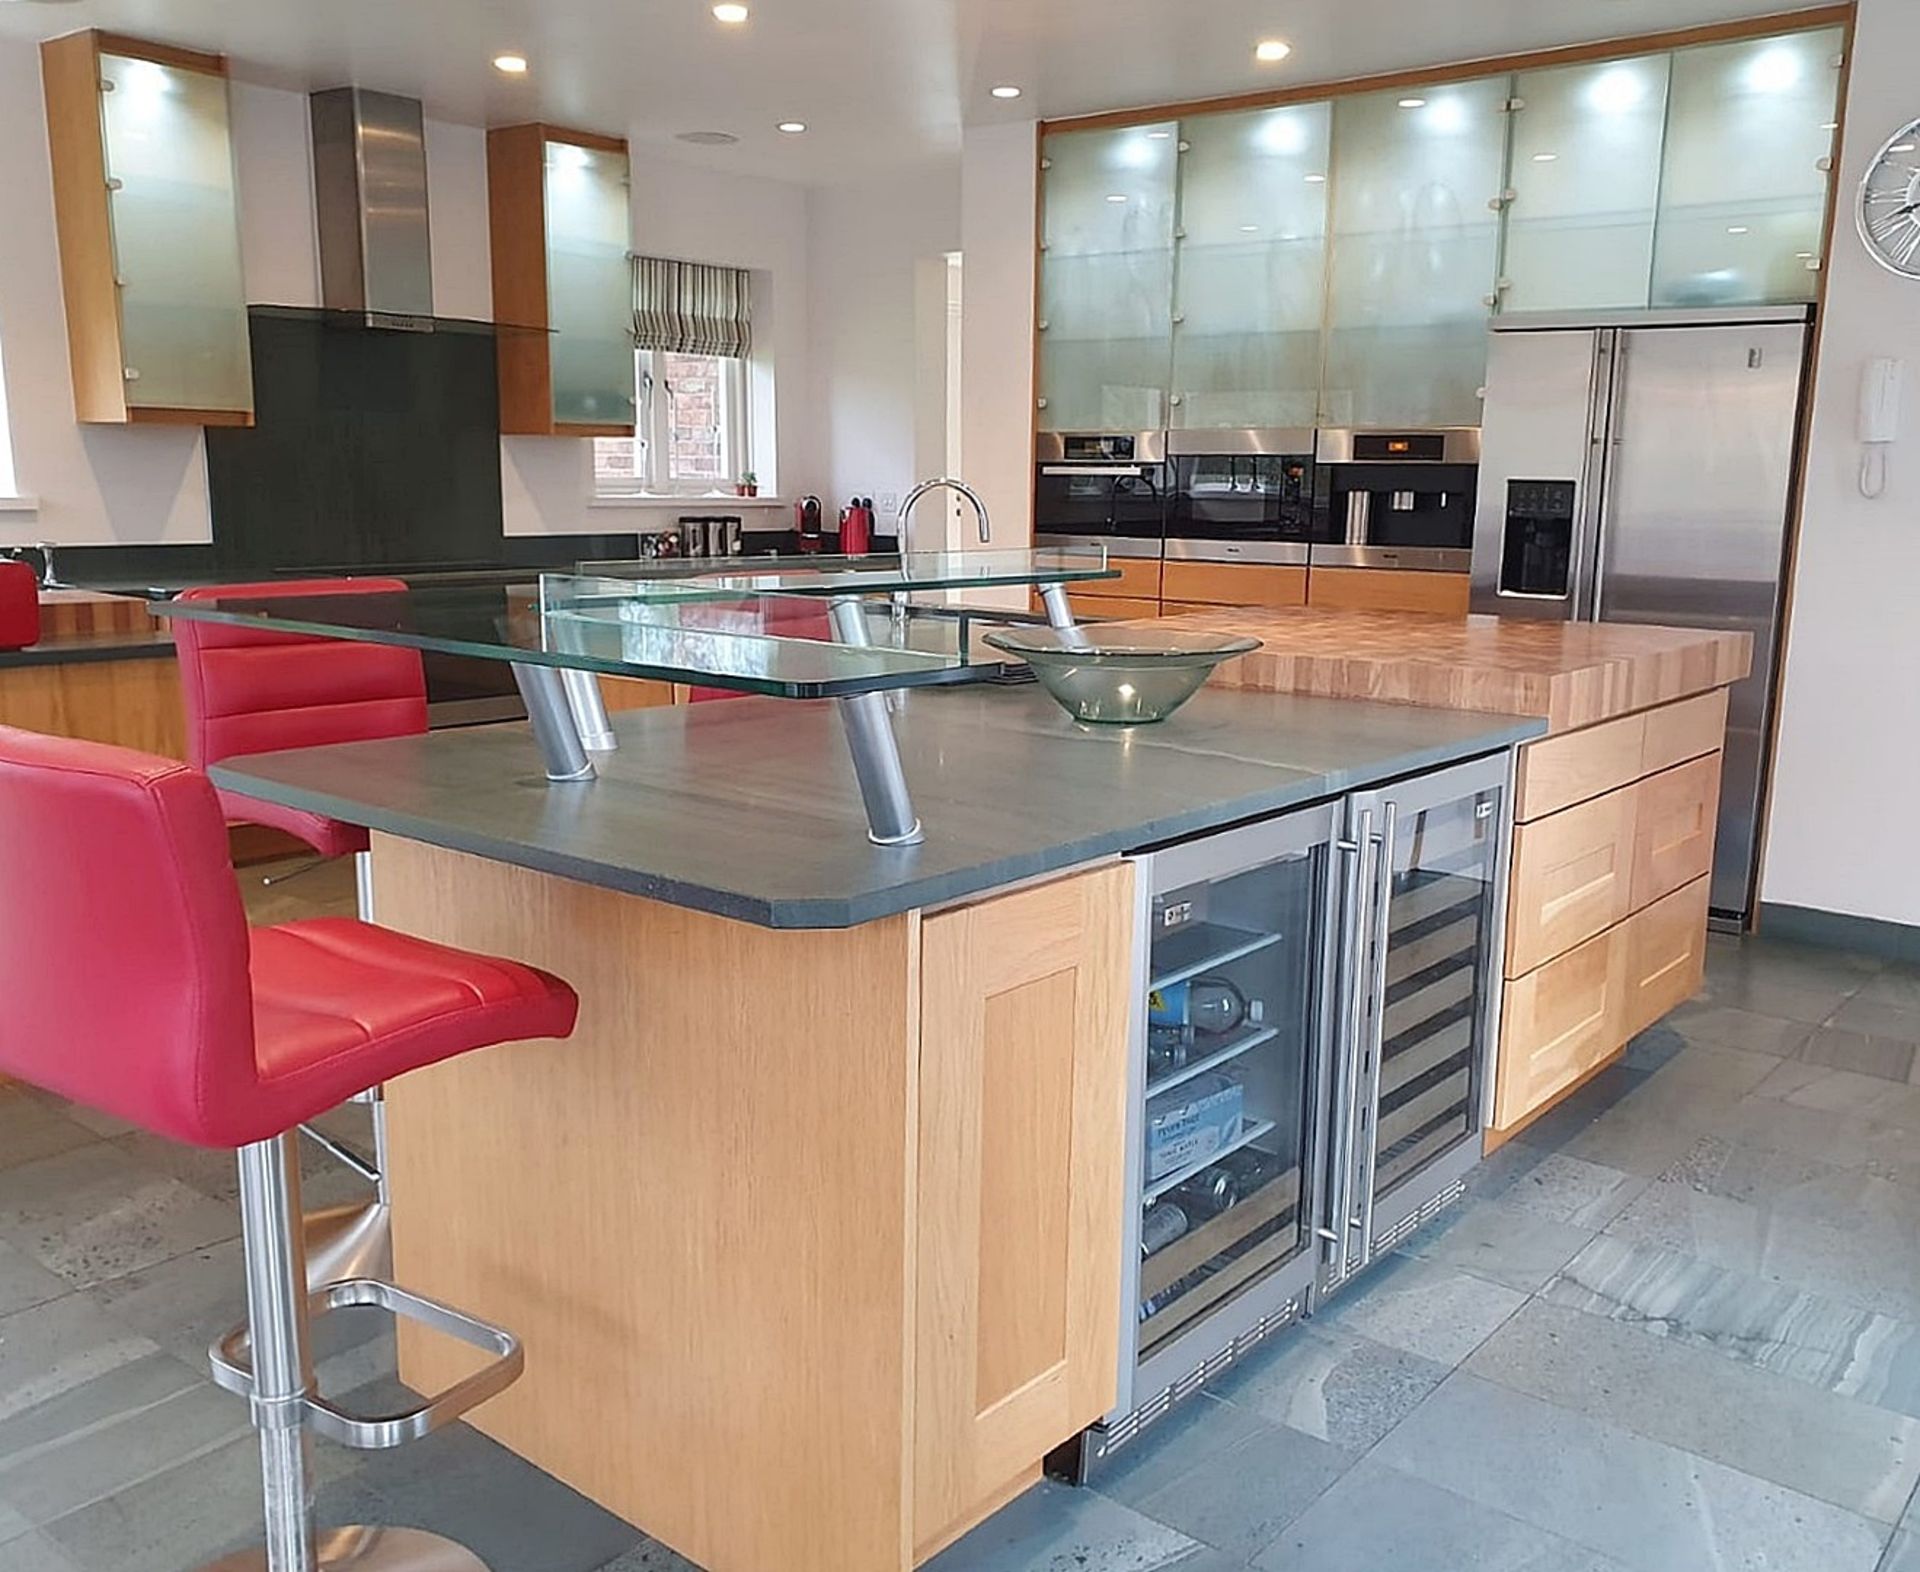 1 x Solid Oak Fitted Kitchen With Intergrated Miele Appliancess - CL487 - Location: Wigan *NO VAT* - Image 3 of 82